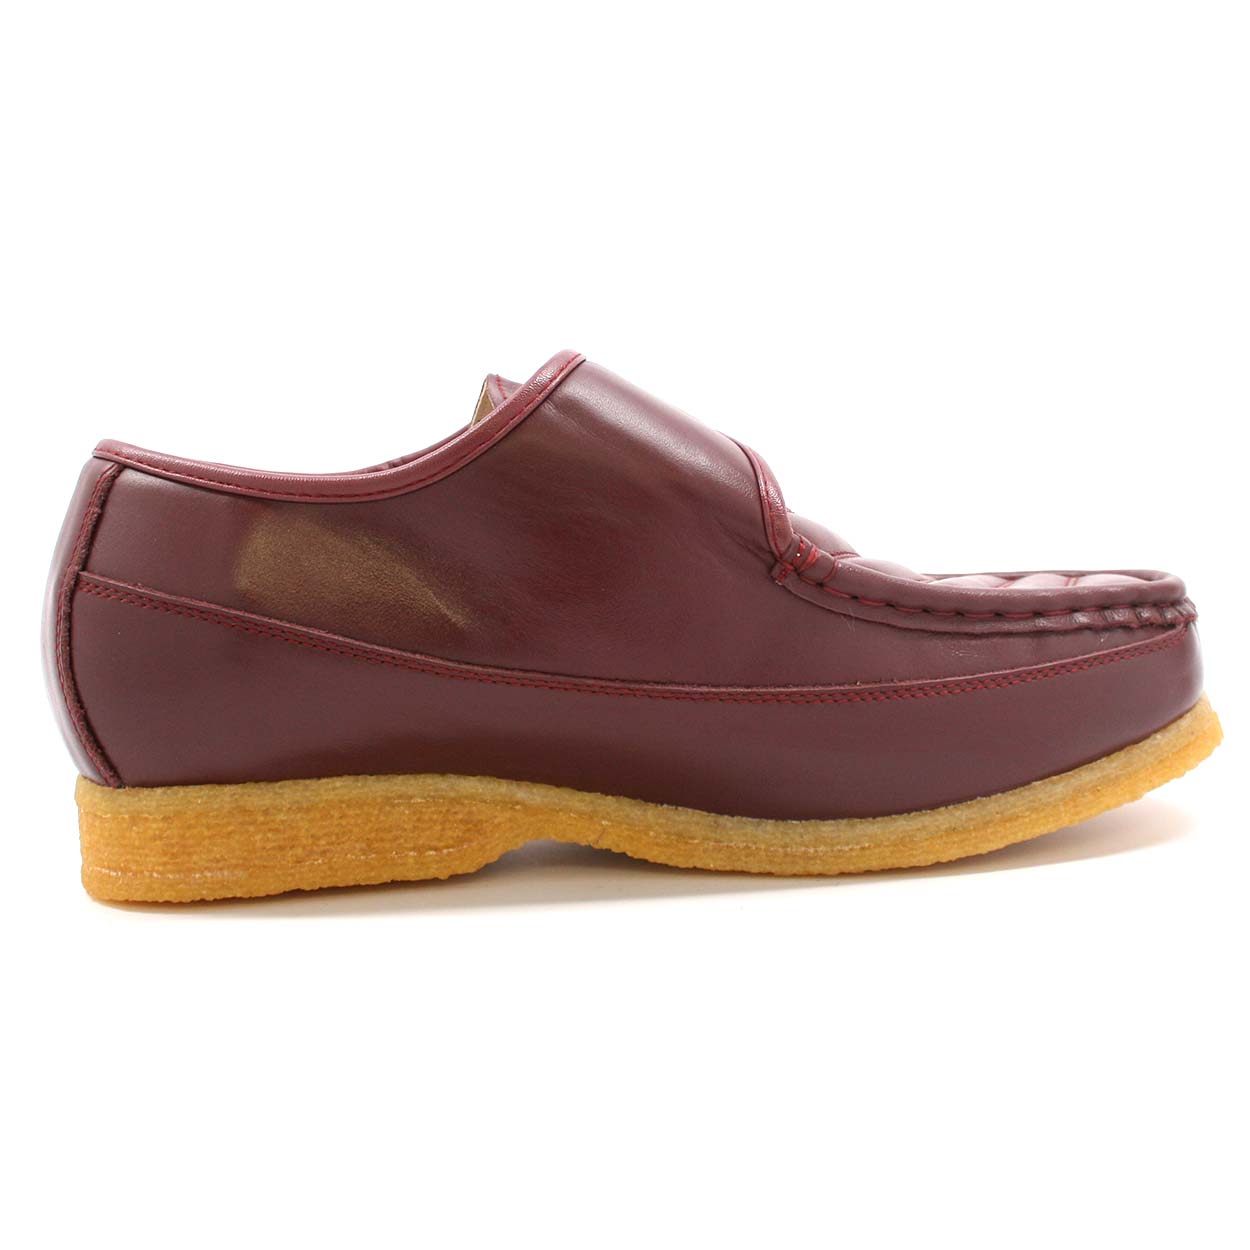 British Collection Royal Old School Slip On Burglary Suede Shoes - $149 ...